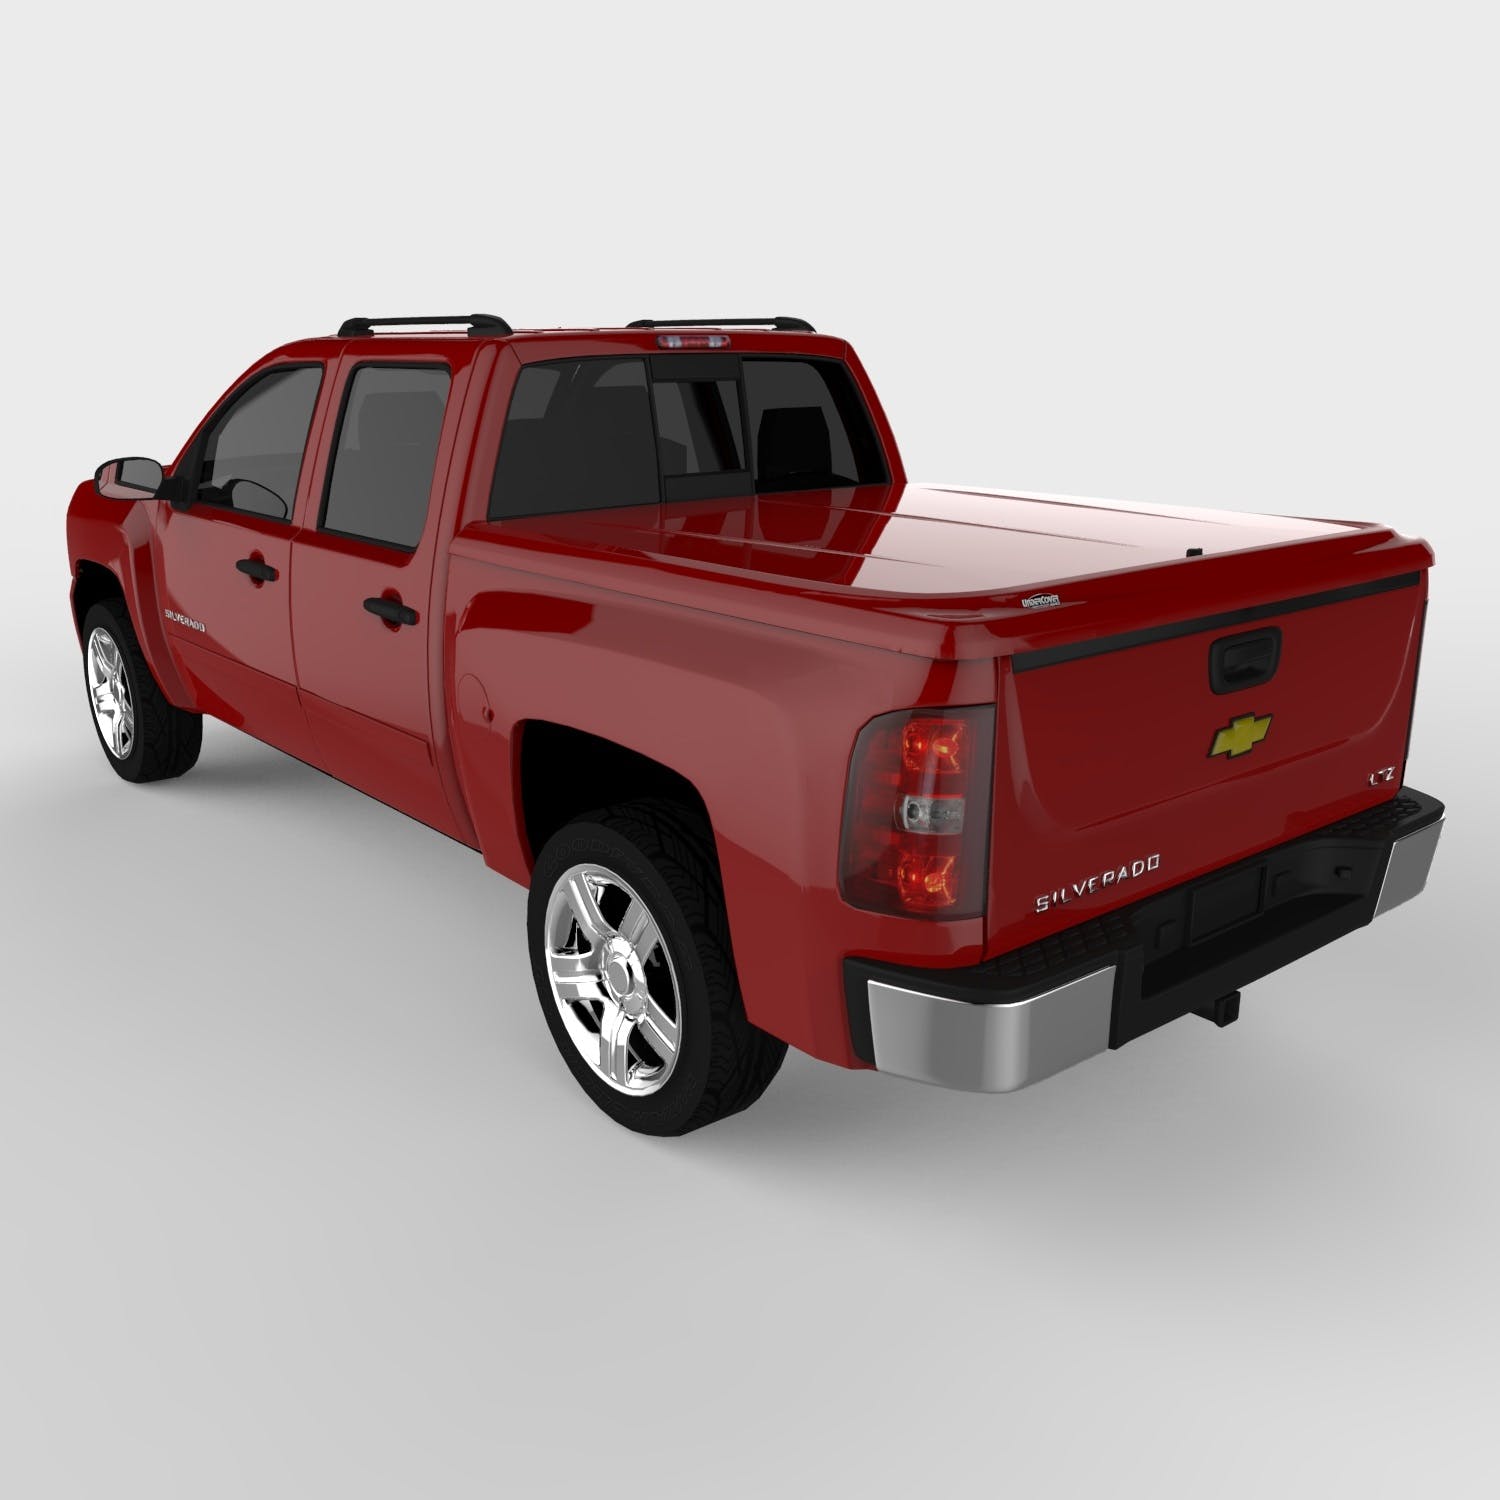 UnderCover UC1066S SE Smooth Tonneau Cover, Smooth-Ready To Paint